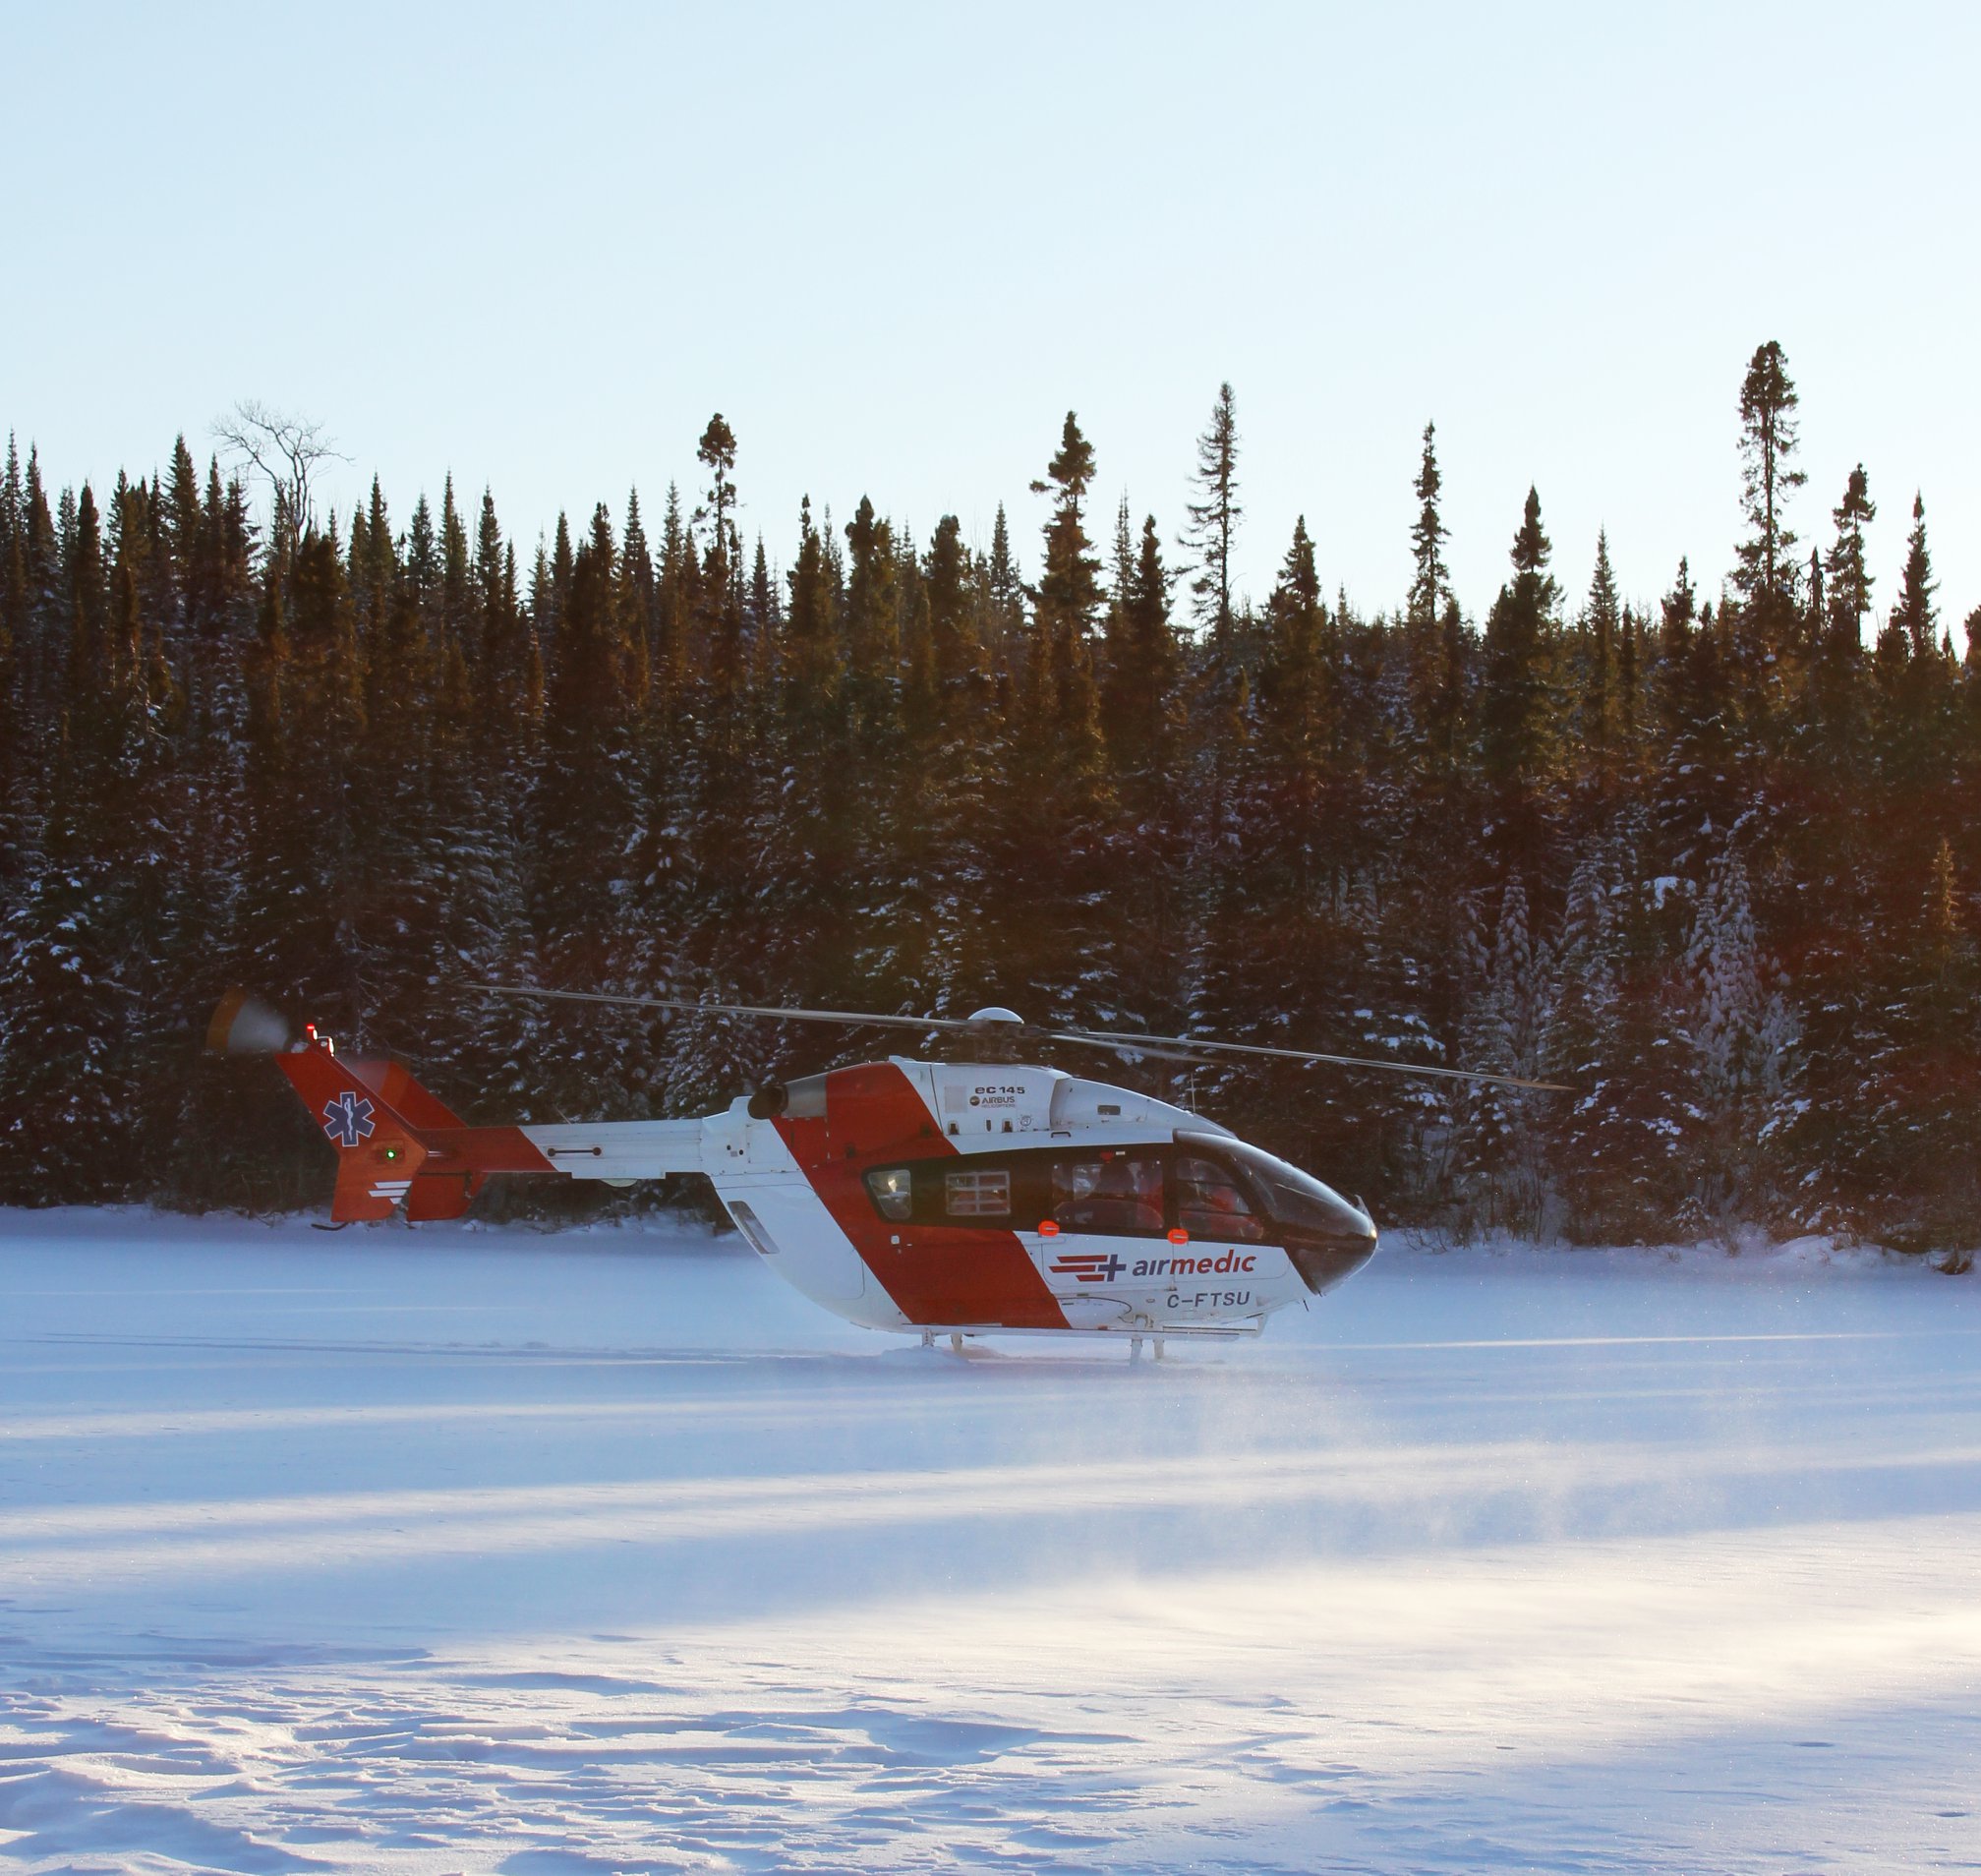 Help is only a flight away with Quebec snowmobiler rescue from Air Medic.